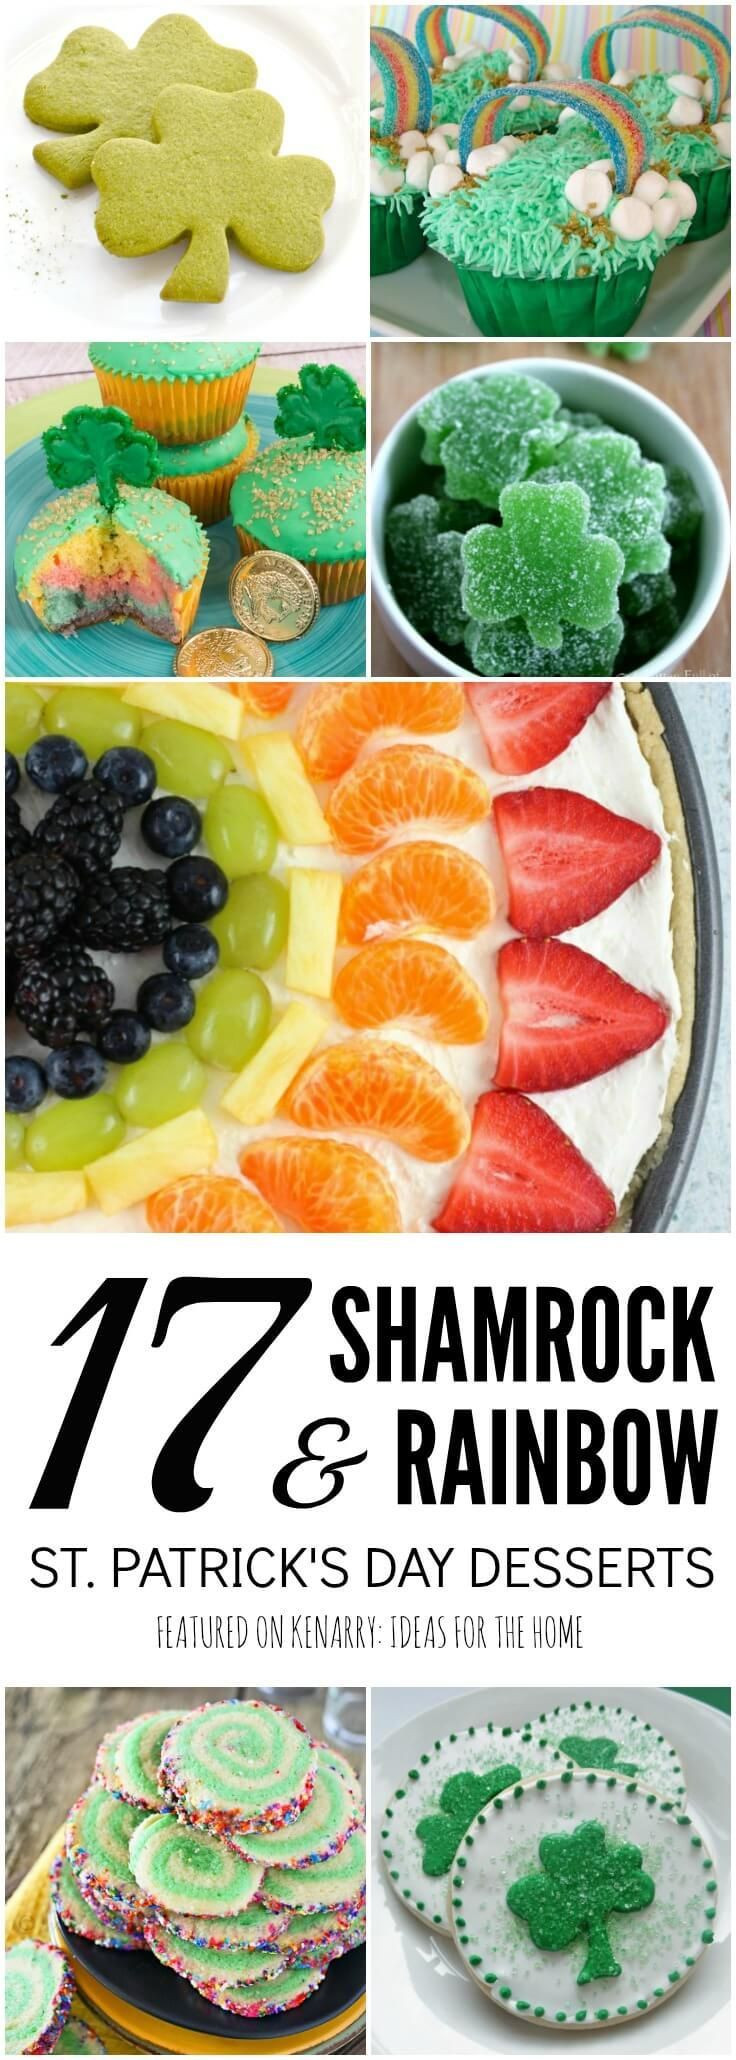 St Patrick's Day Potluck Ideas
 1373 best images about Shamrocks and Leprechauns on Pinterest